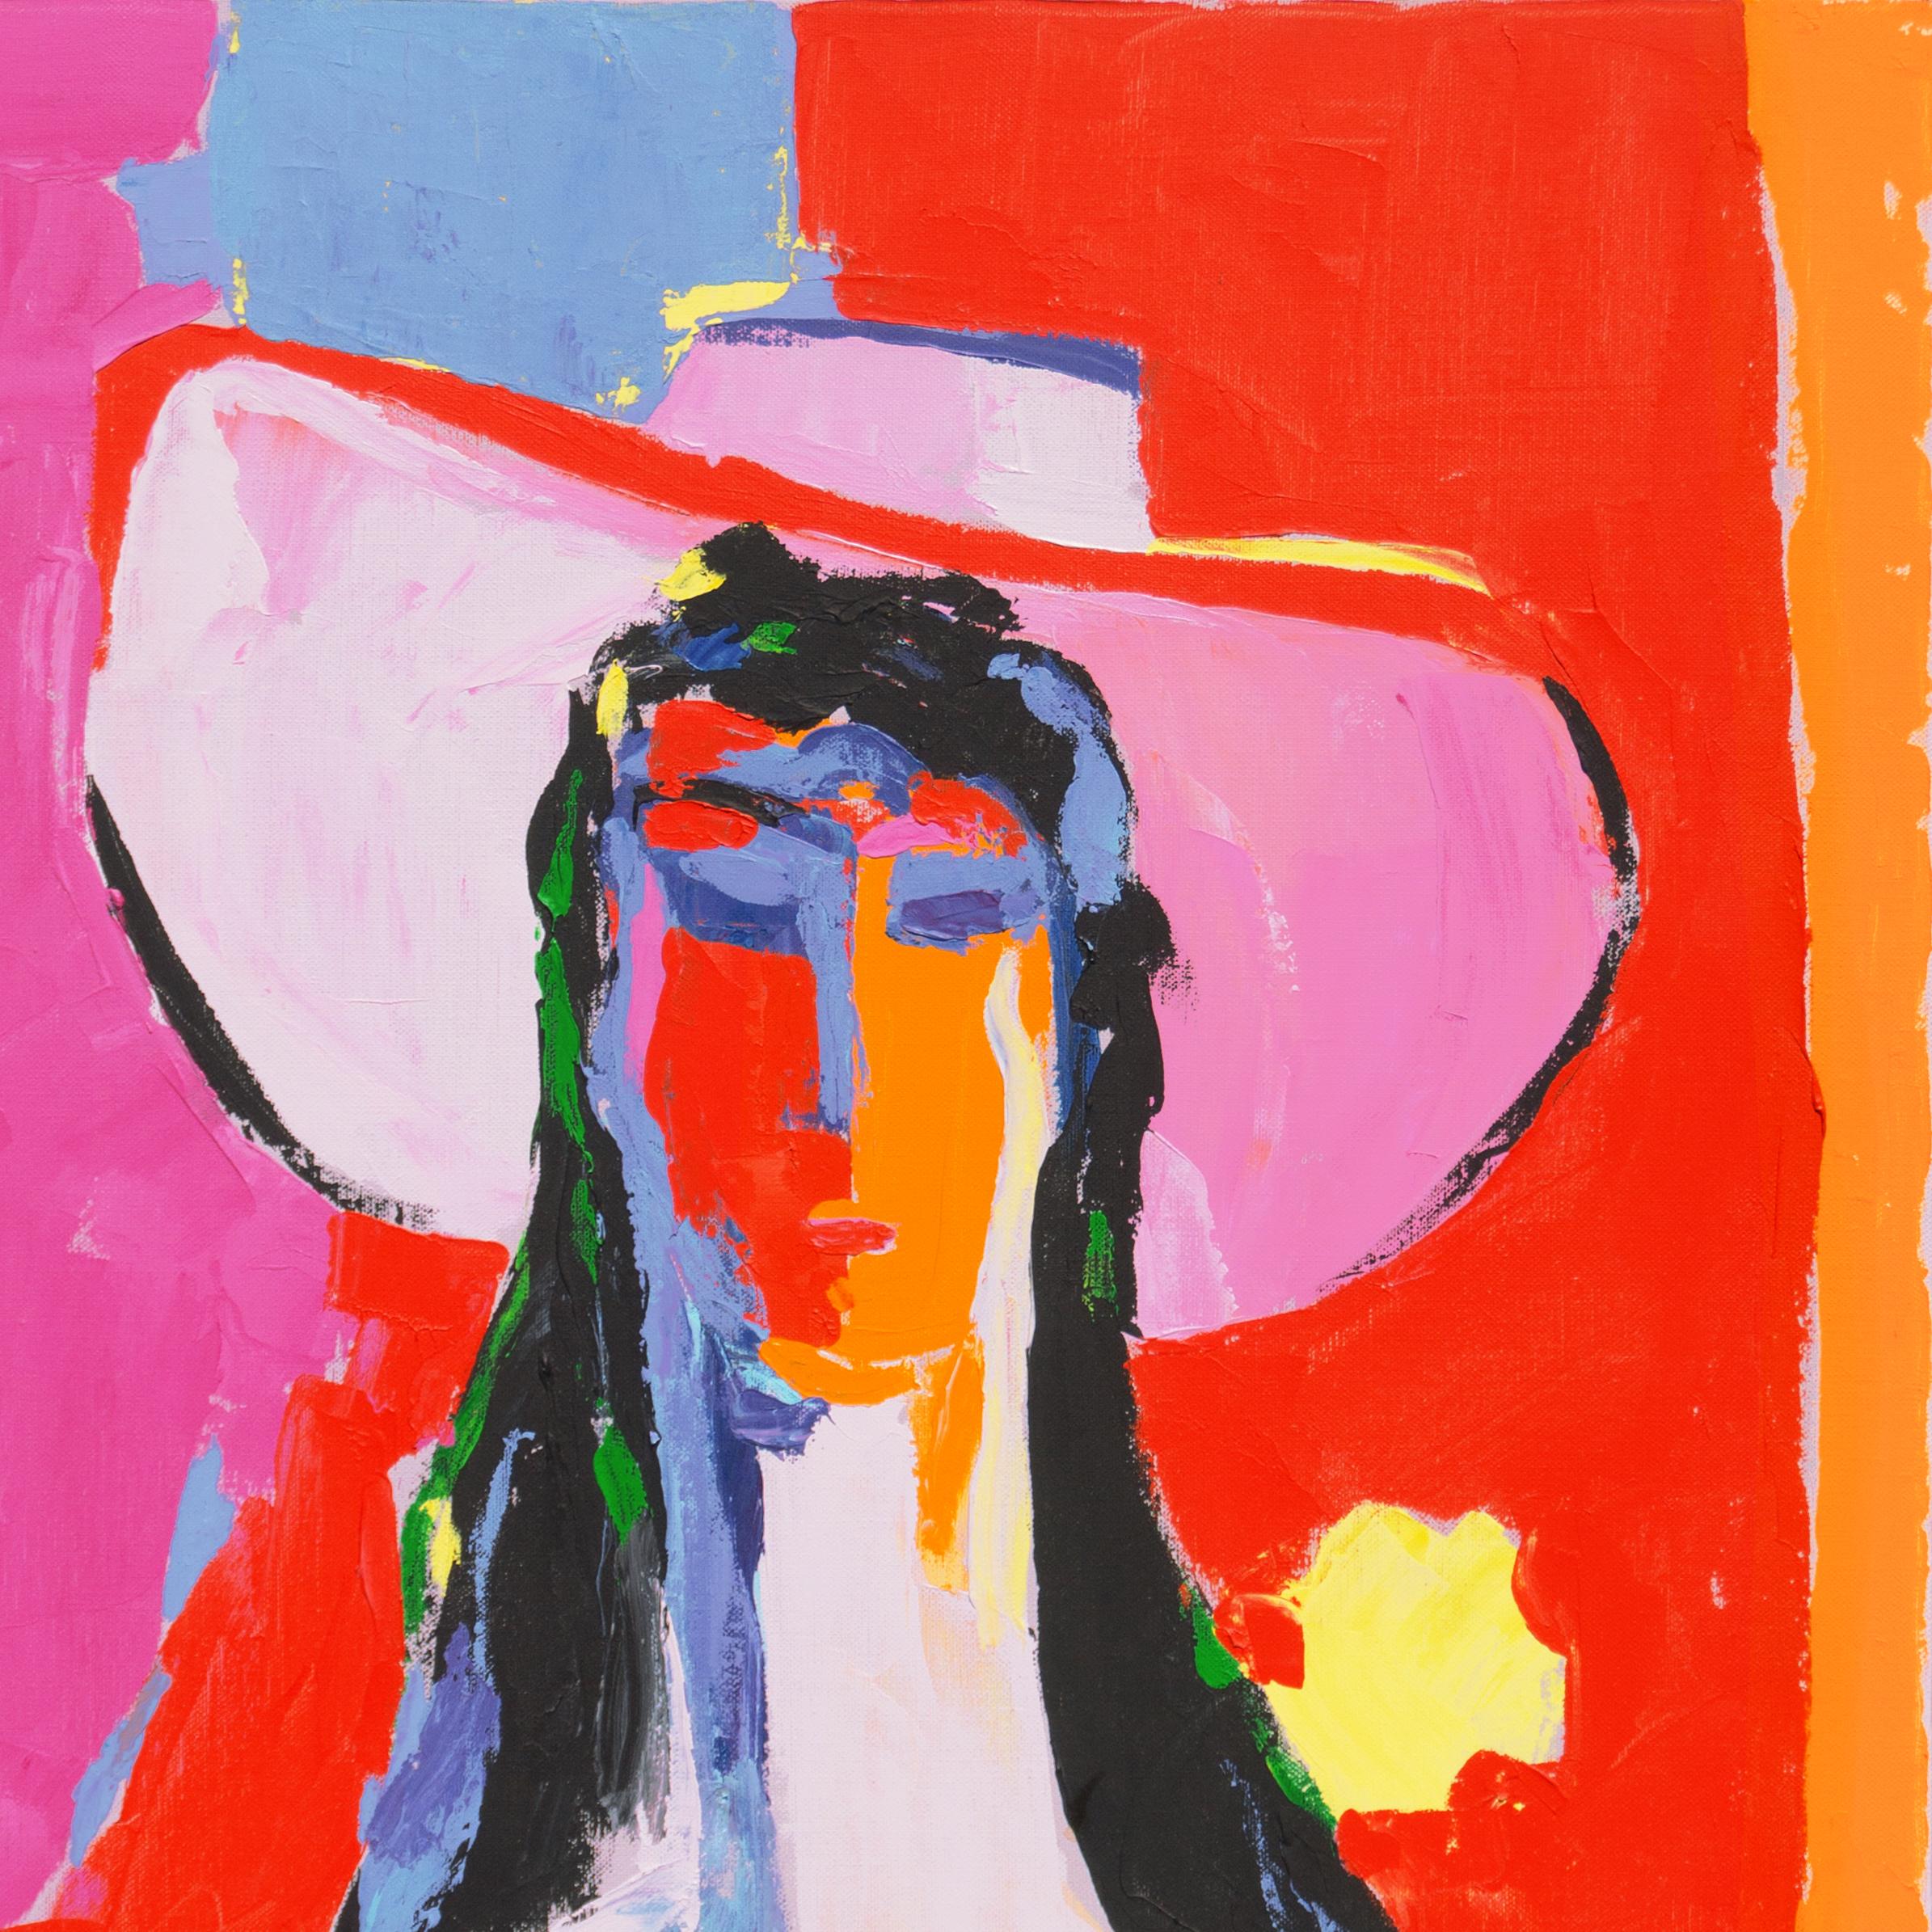 Signed lower right, 'Dooley' for Helen Bertha Dooley, (American, 1907-1994); additionally signed, verso, and titled 'Hat Lady'. 
Exhibited: Carmel Art Association, California, 1983.
Provenance: Dr. Richard Ferguson, San Francisco.

Helen Dooley was